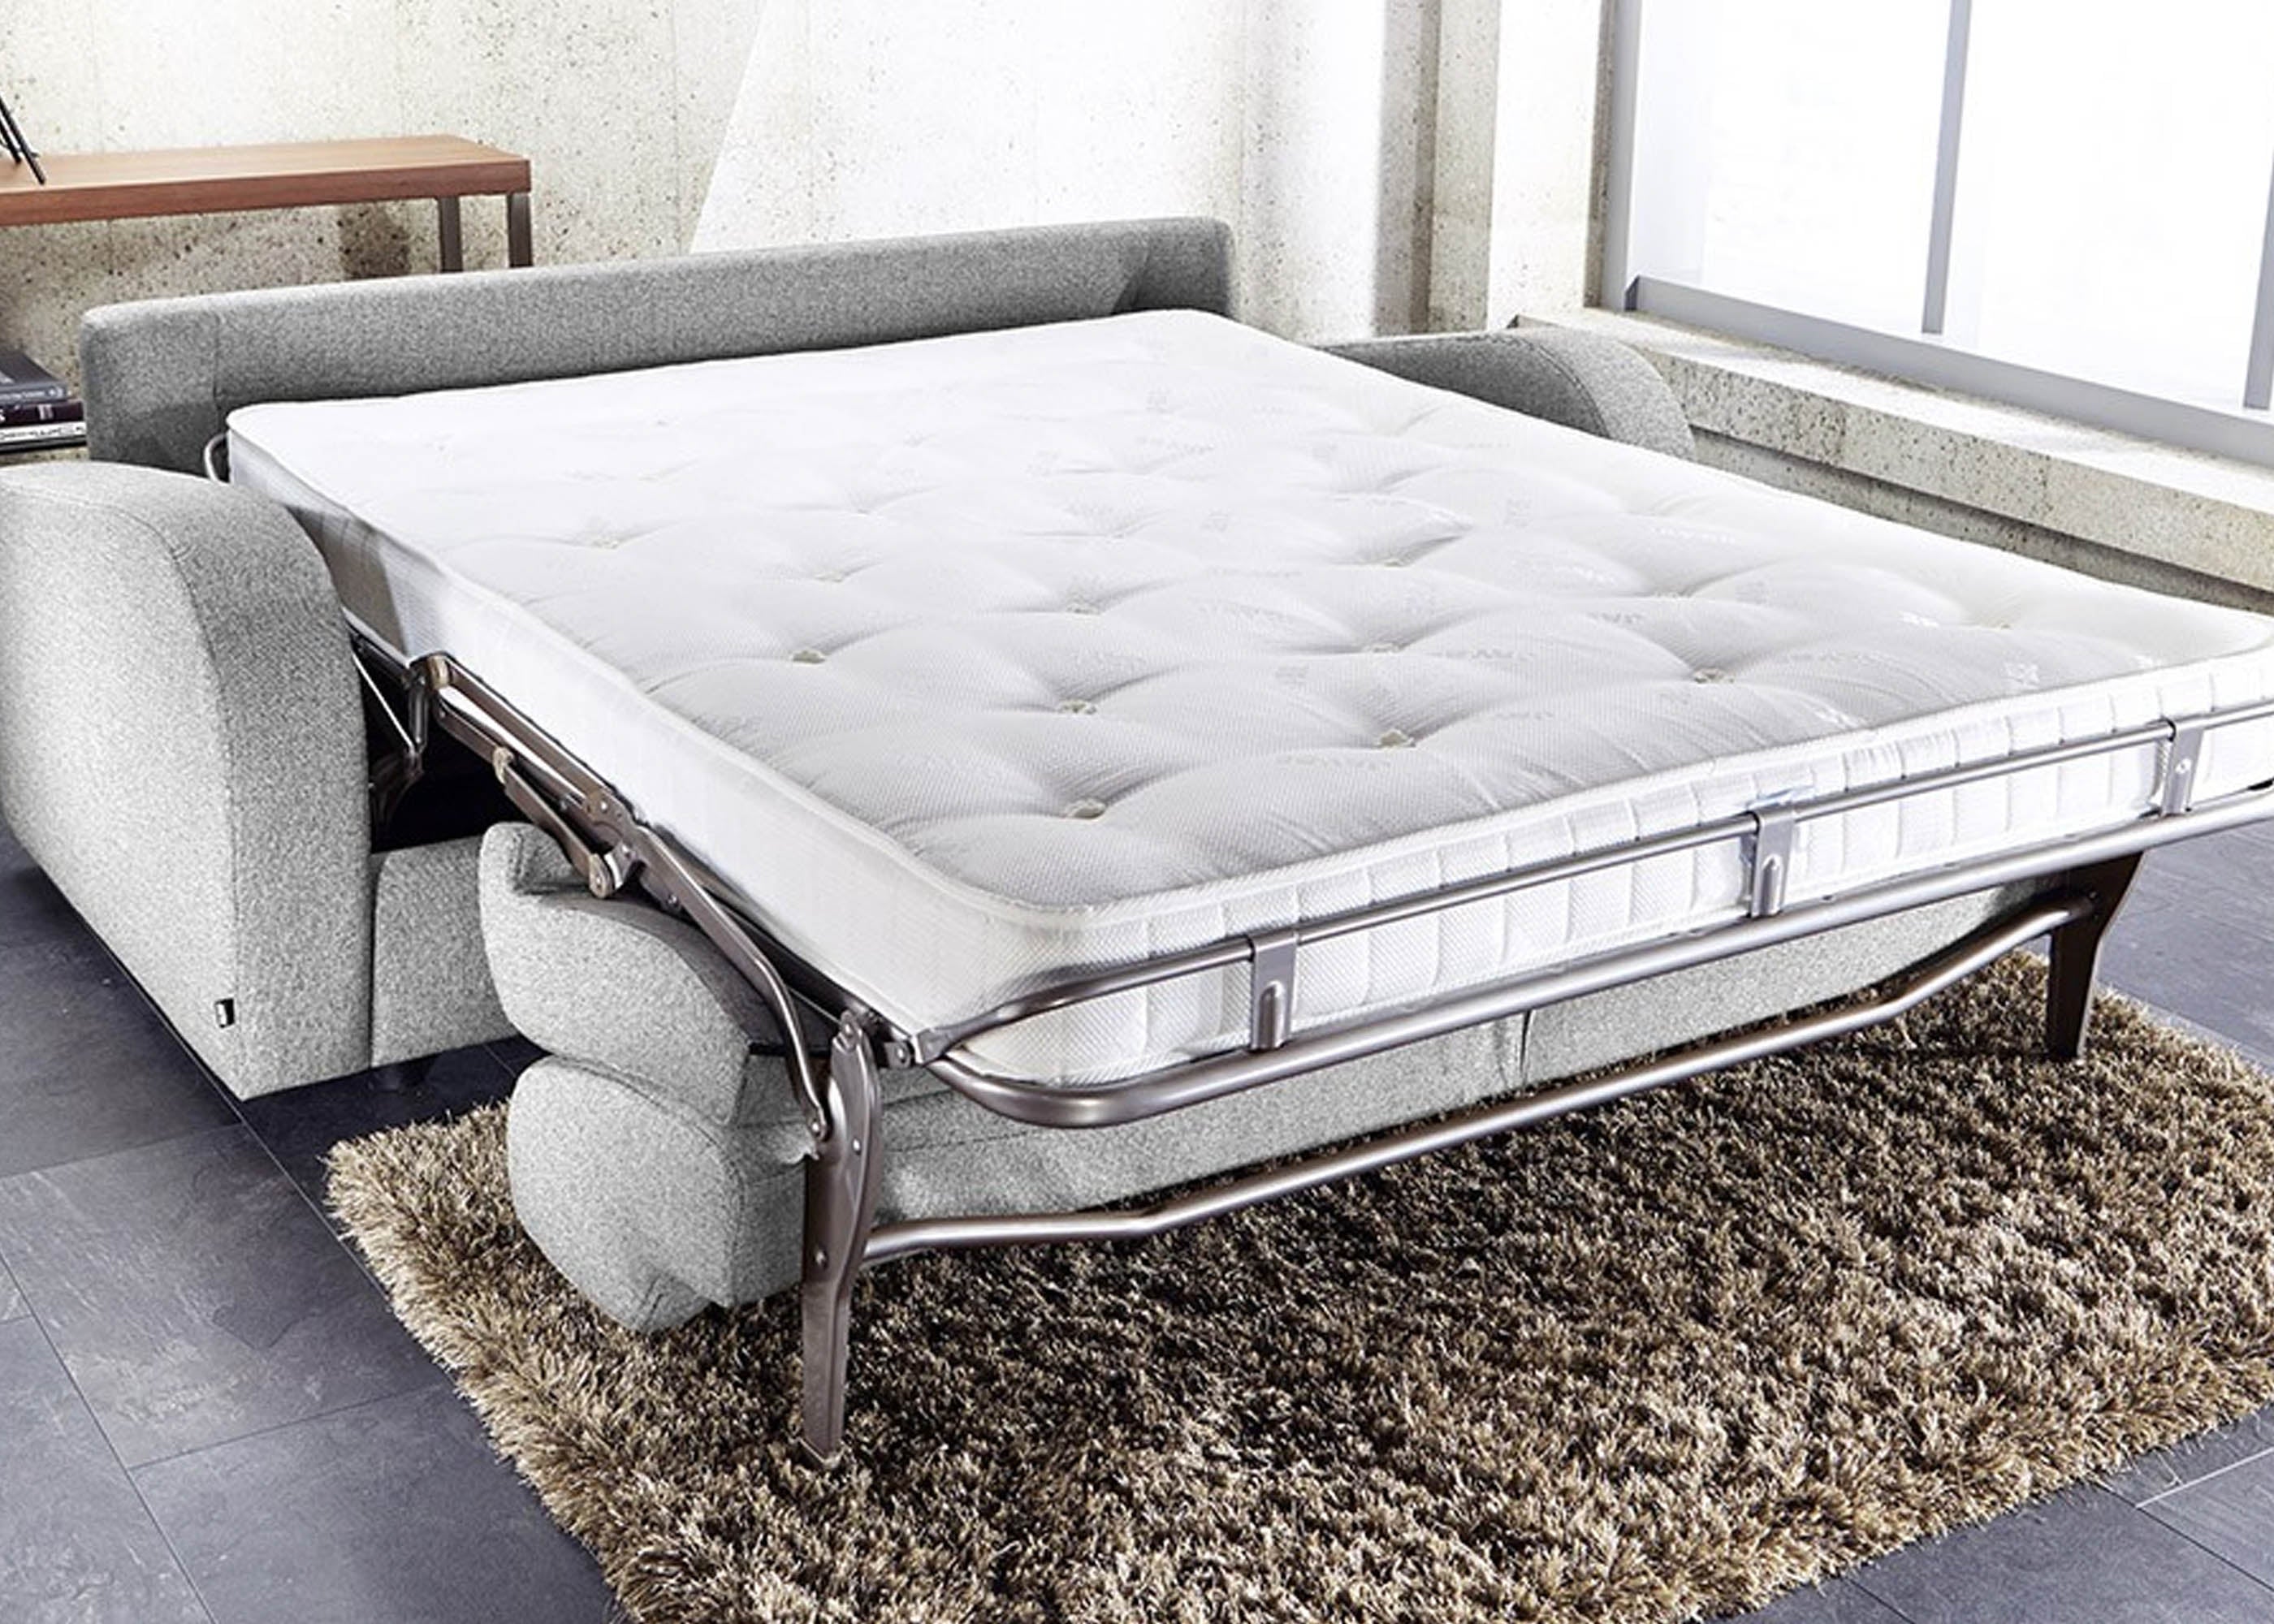 3 seater sofa bed with pocket sprung mattress